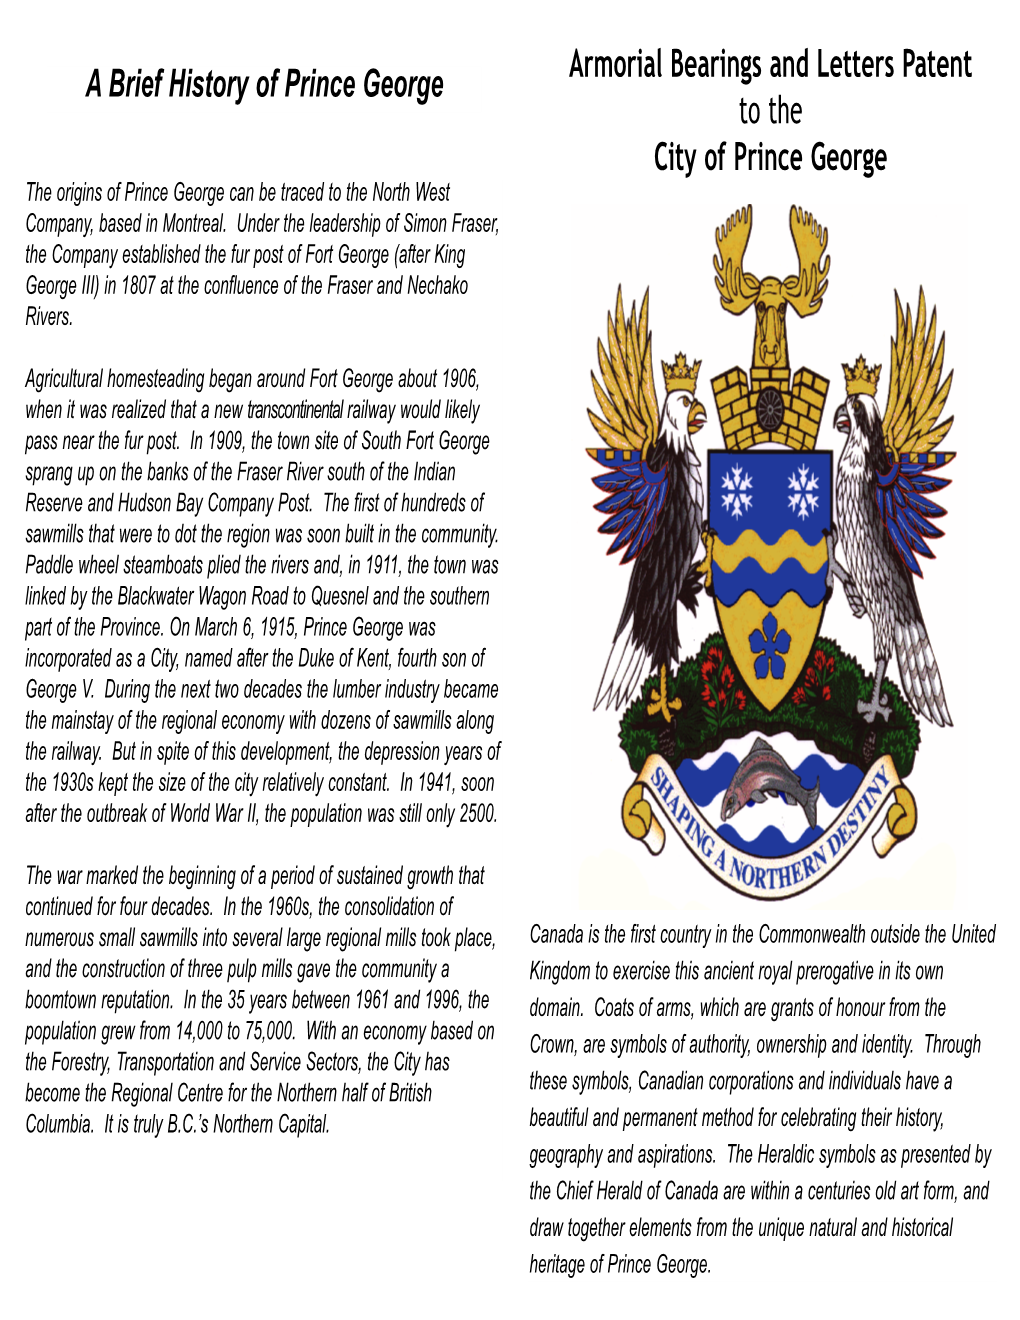 Armorial Bearings and Letters Patent to the City of Prince George